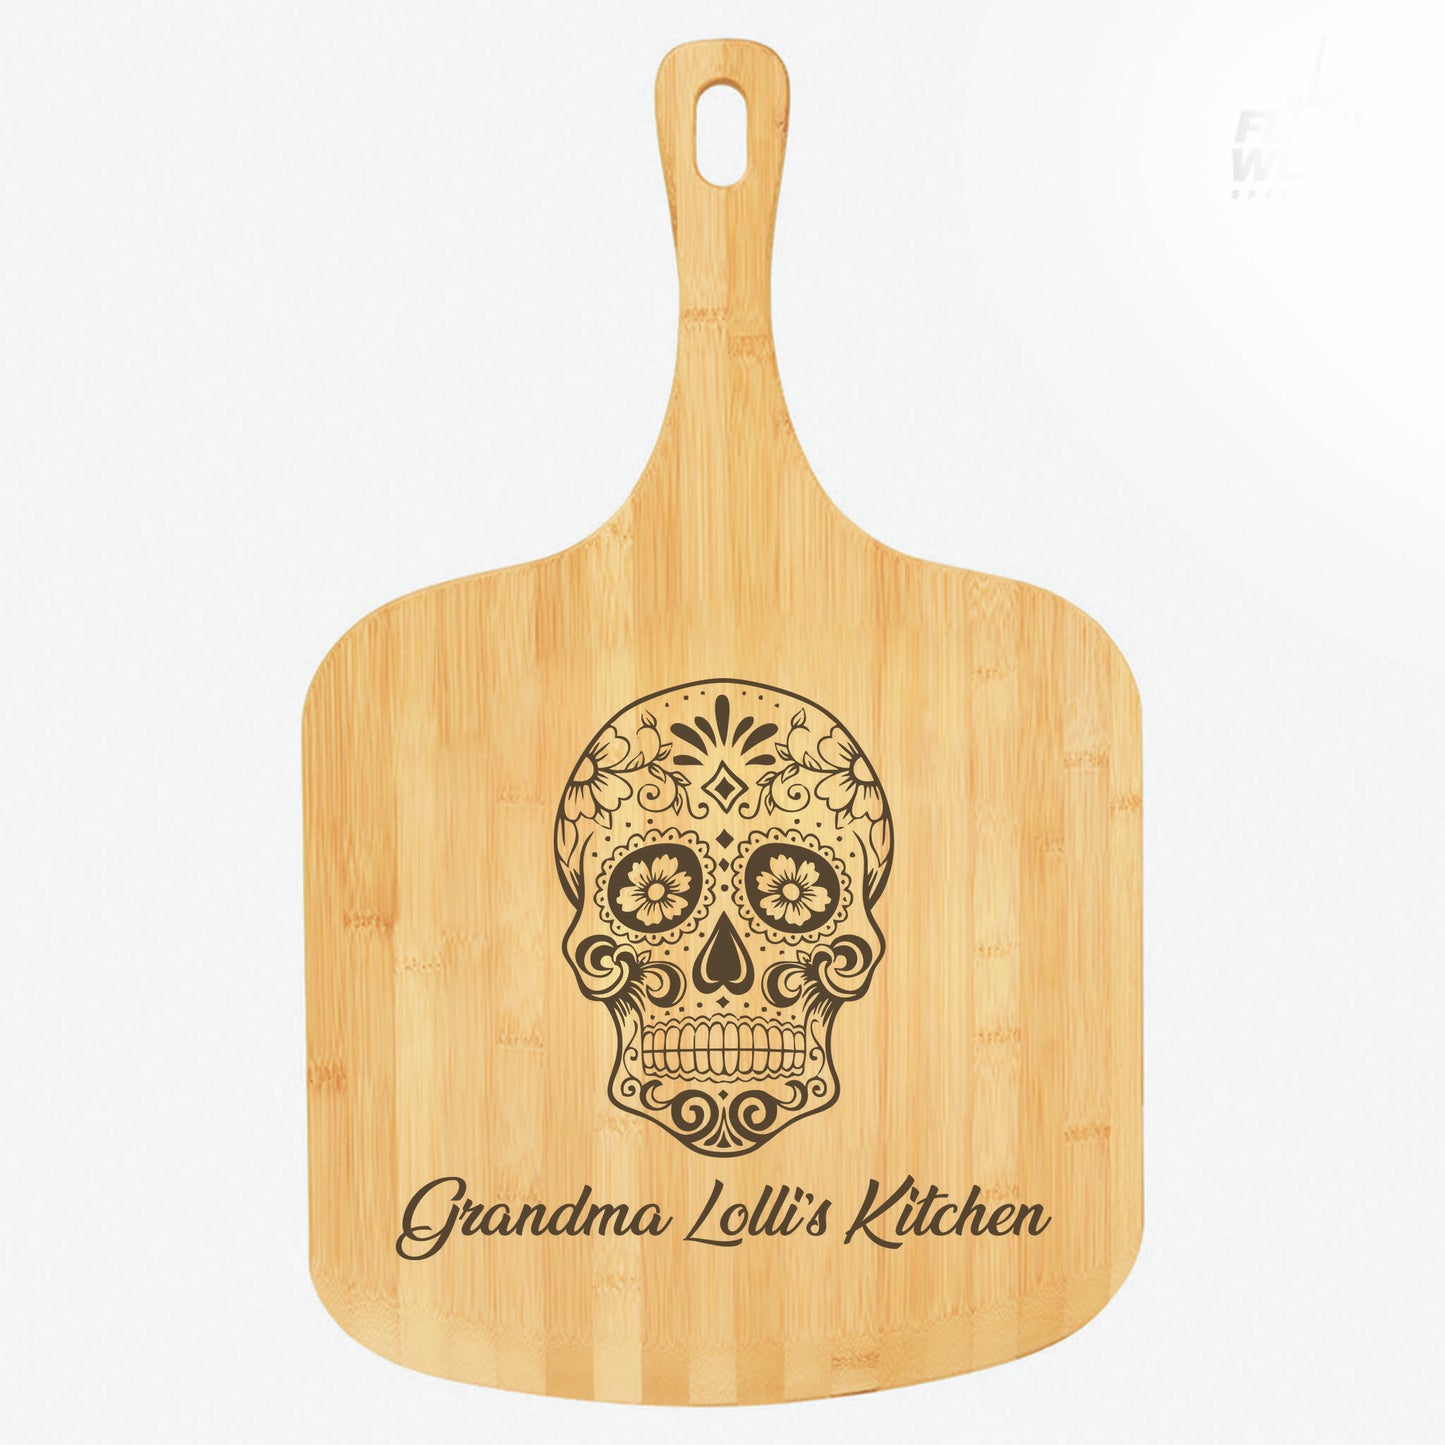 Sugar Skull Bamboo Cutting Boards | Personalized Day Of The Dead Wood Cutting Boards | Different Styles Available